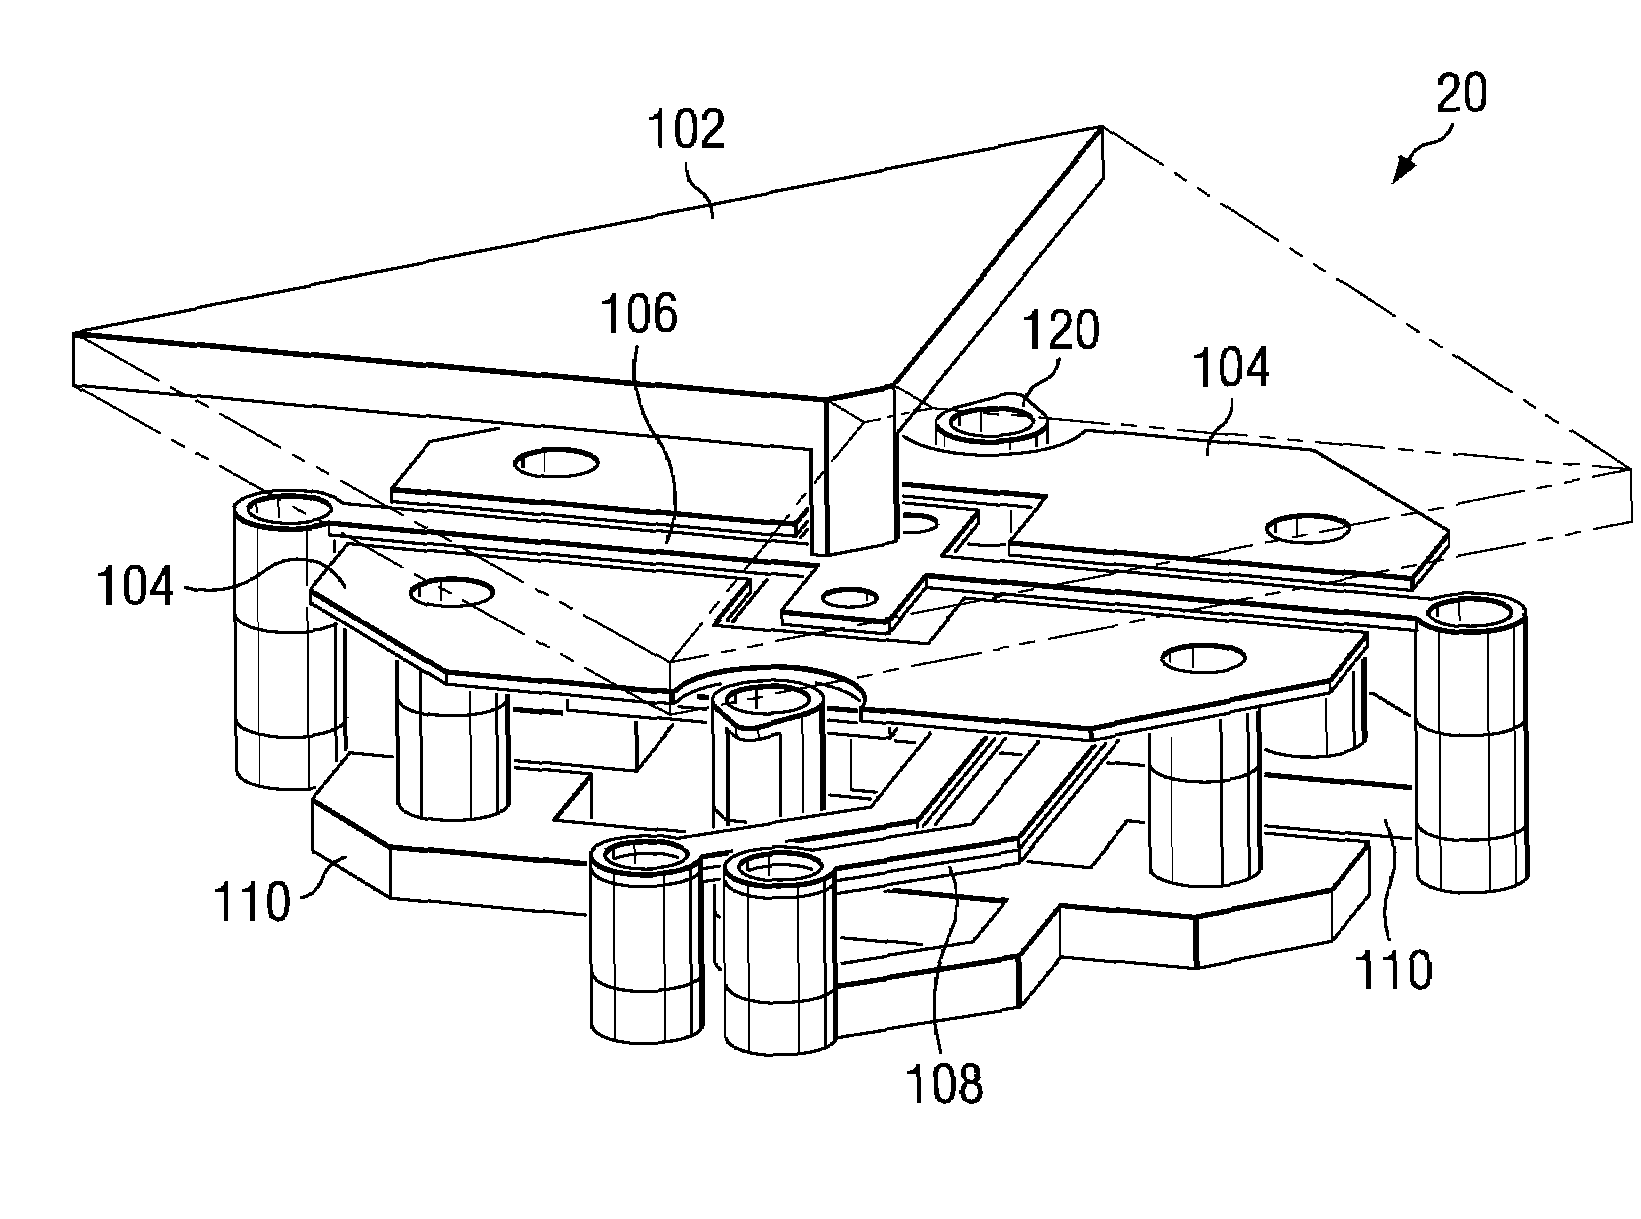 Micromirror system with electrothermal actuator mechanism